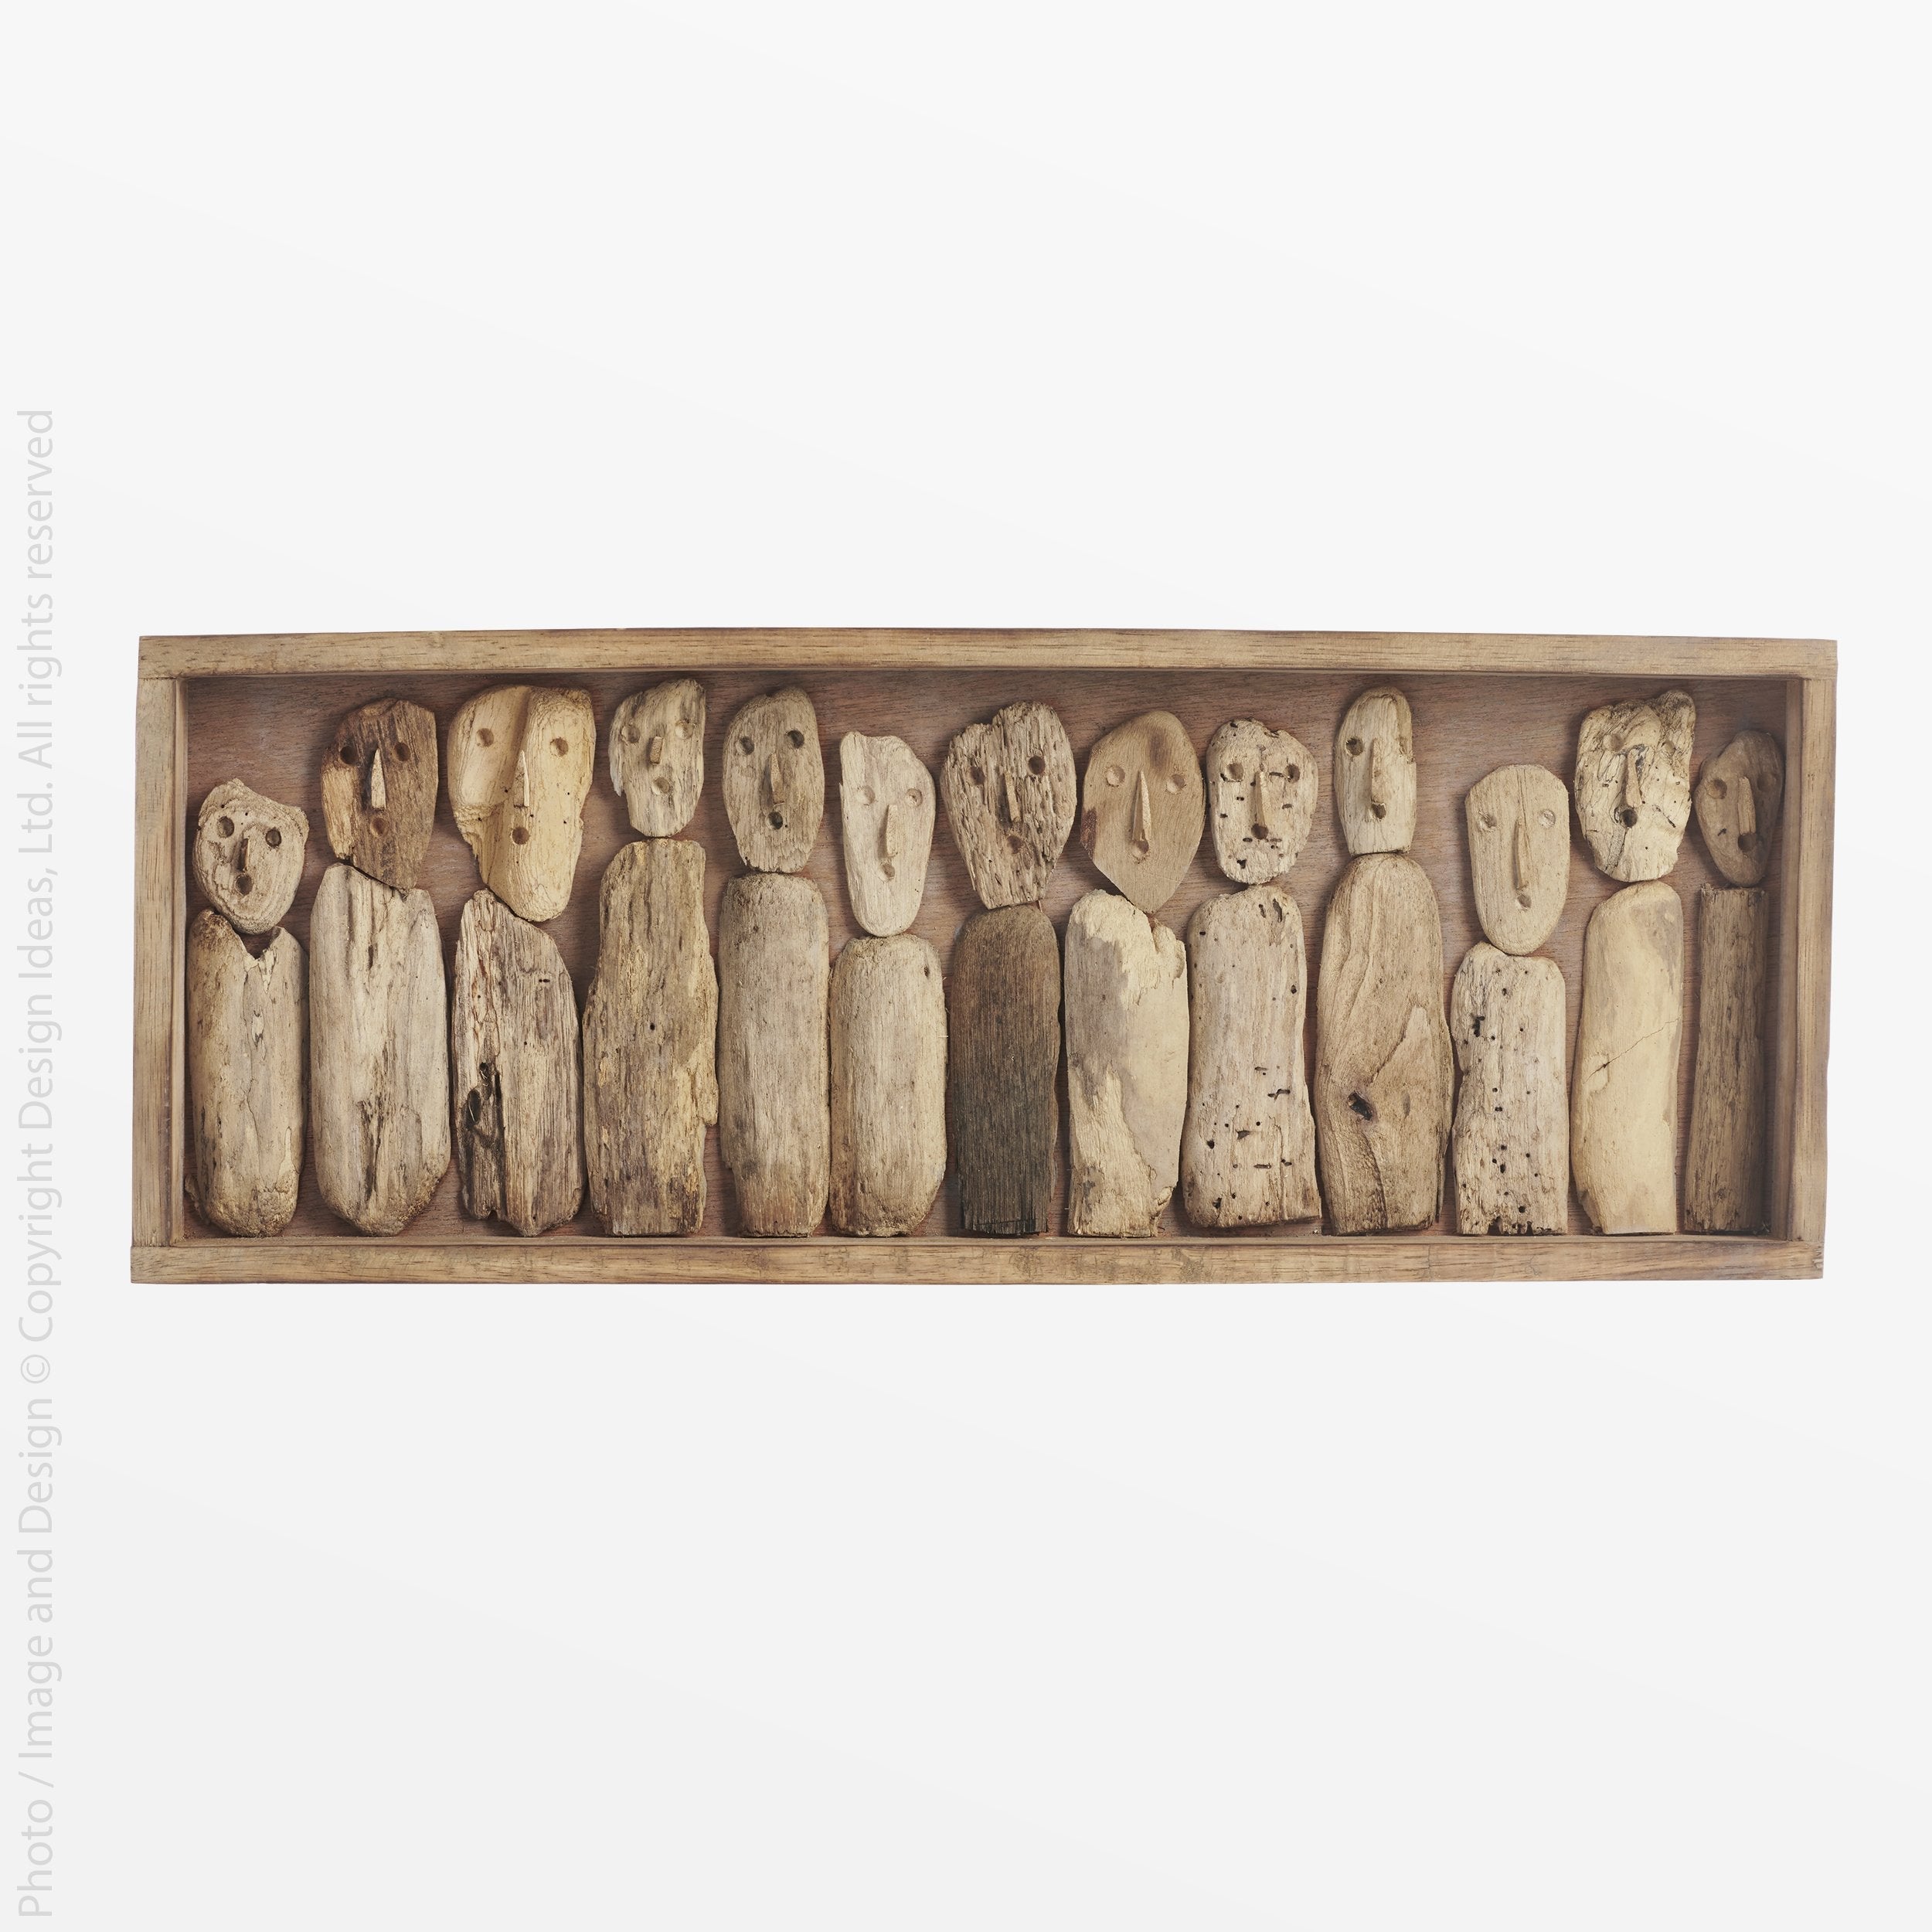 Tavu™ shadow box (26 x 10 x 3in) - Natural | Image 1 | Premium Decorative from the Tavu collection | made with Recycled wood for long lasting use | sustainably sourced with recycled materials | texxture